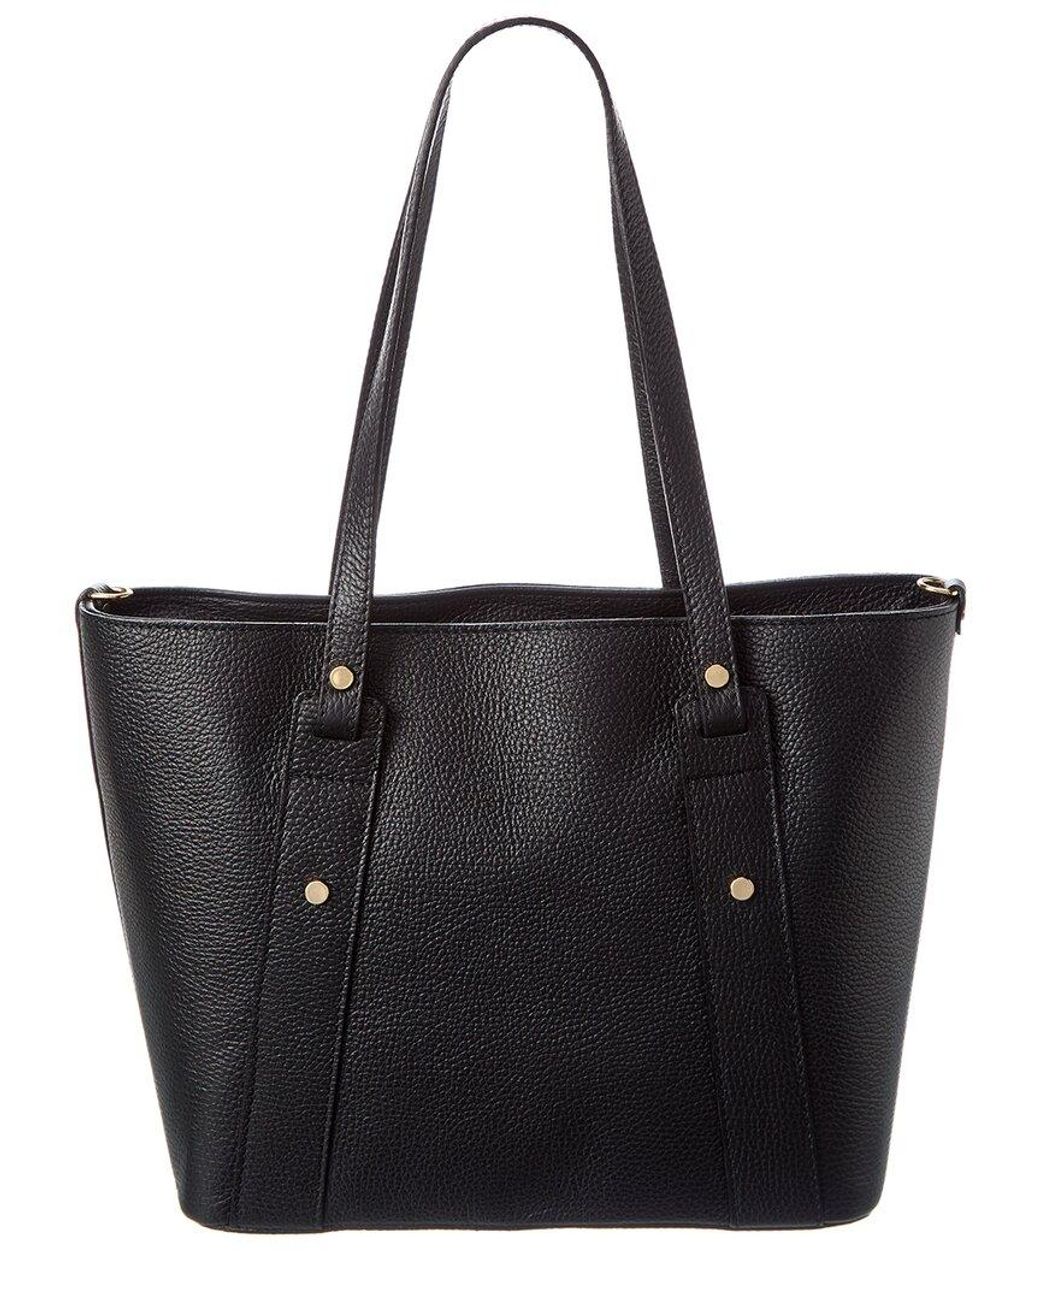 Persaman New York Amiee Leather Tote in Black | Lyst